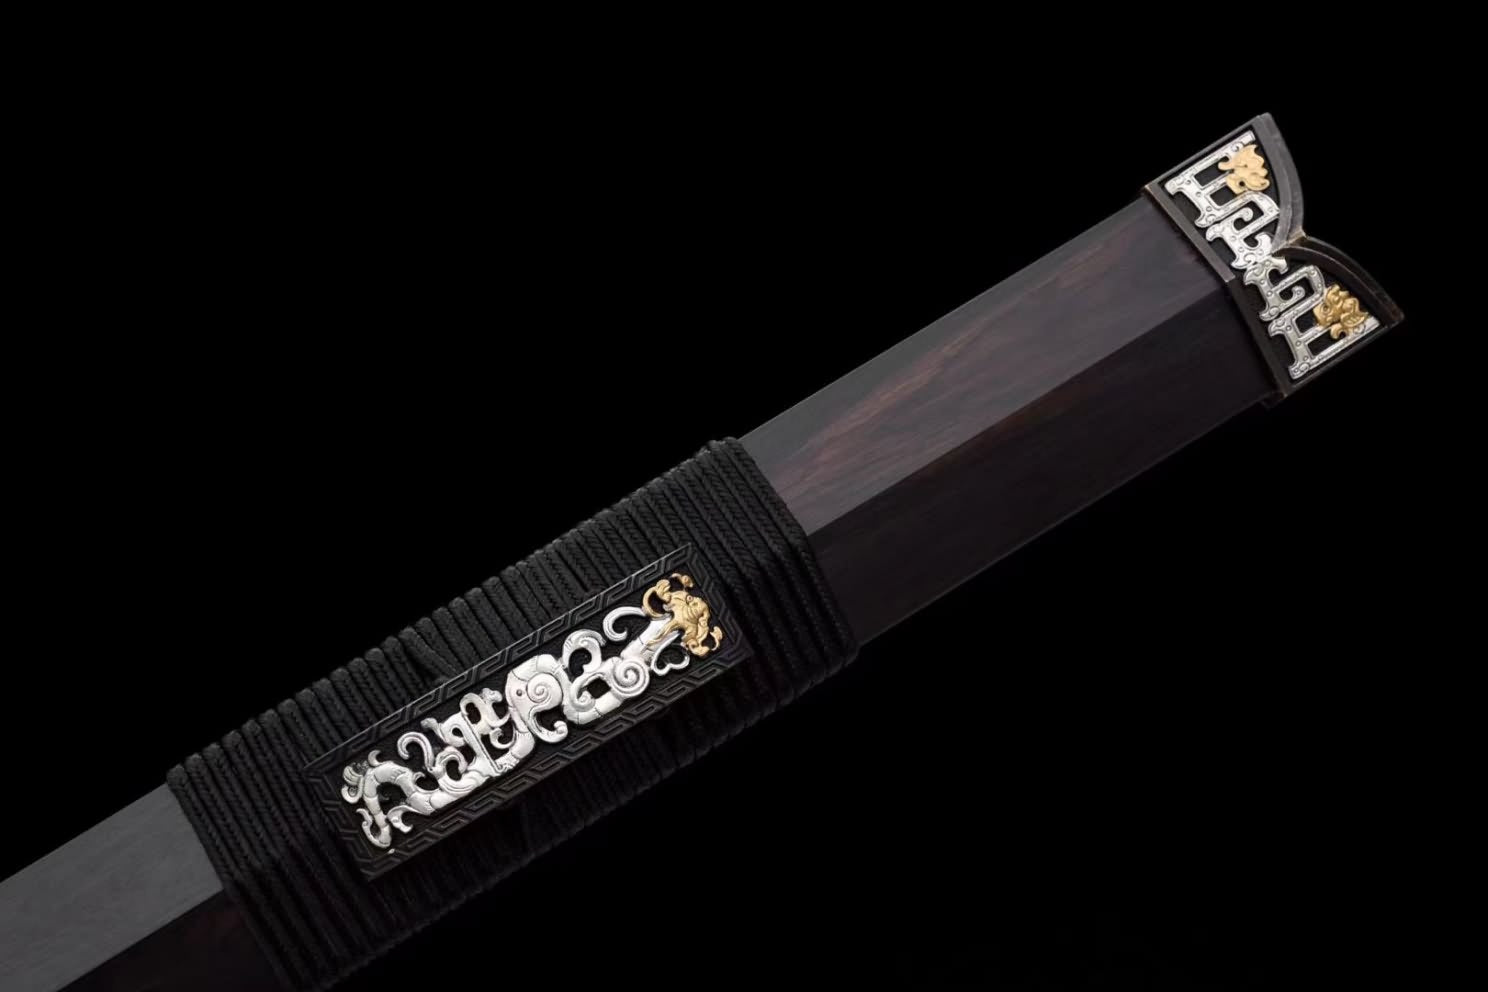 Exquisite Chinese Sword - Hand Forged Damascus Steel Blade, Ebony Handle, Brass Fittings